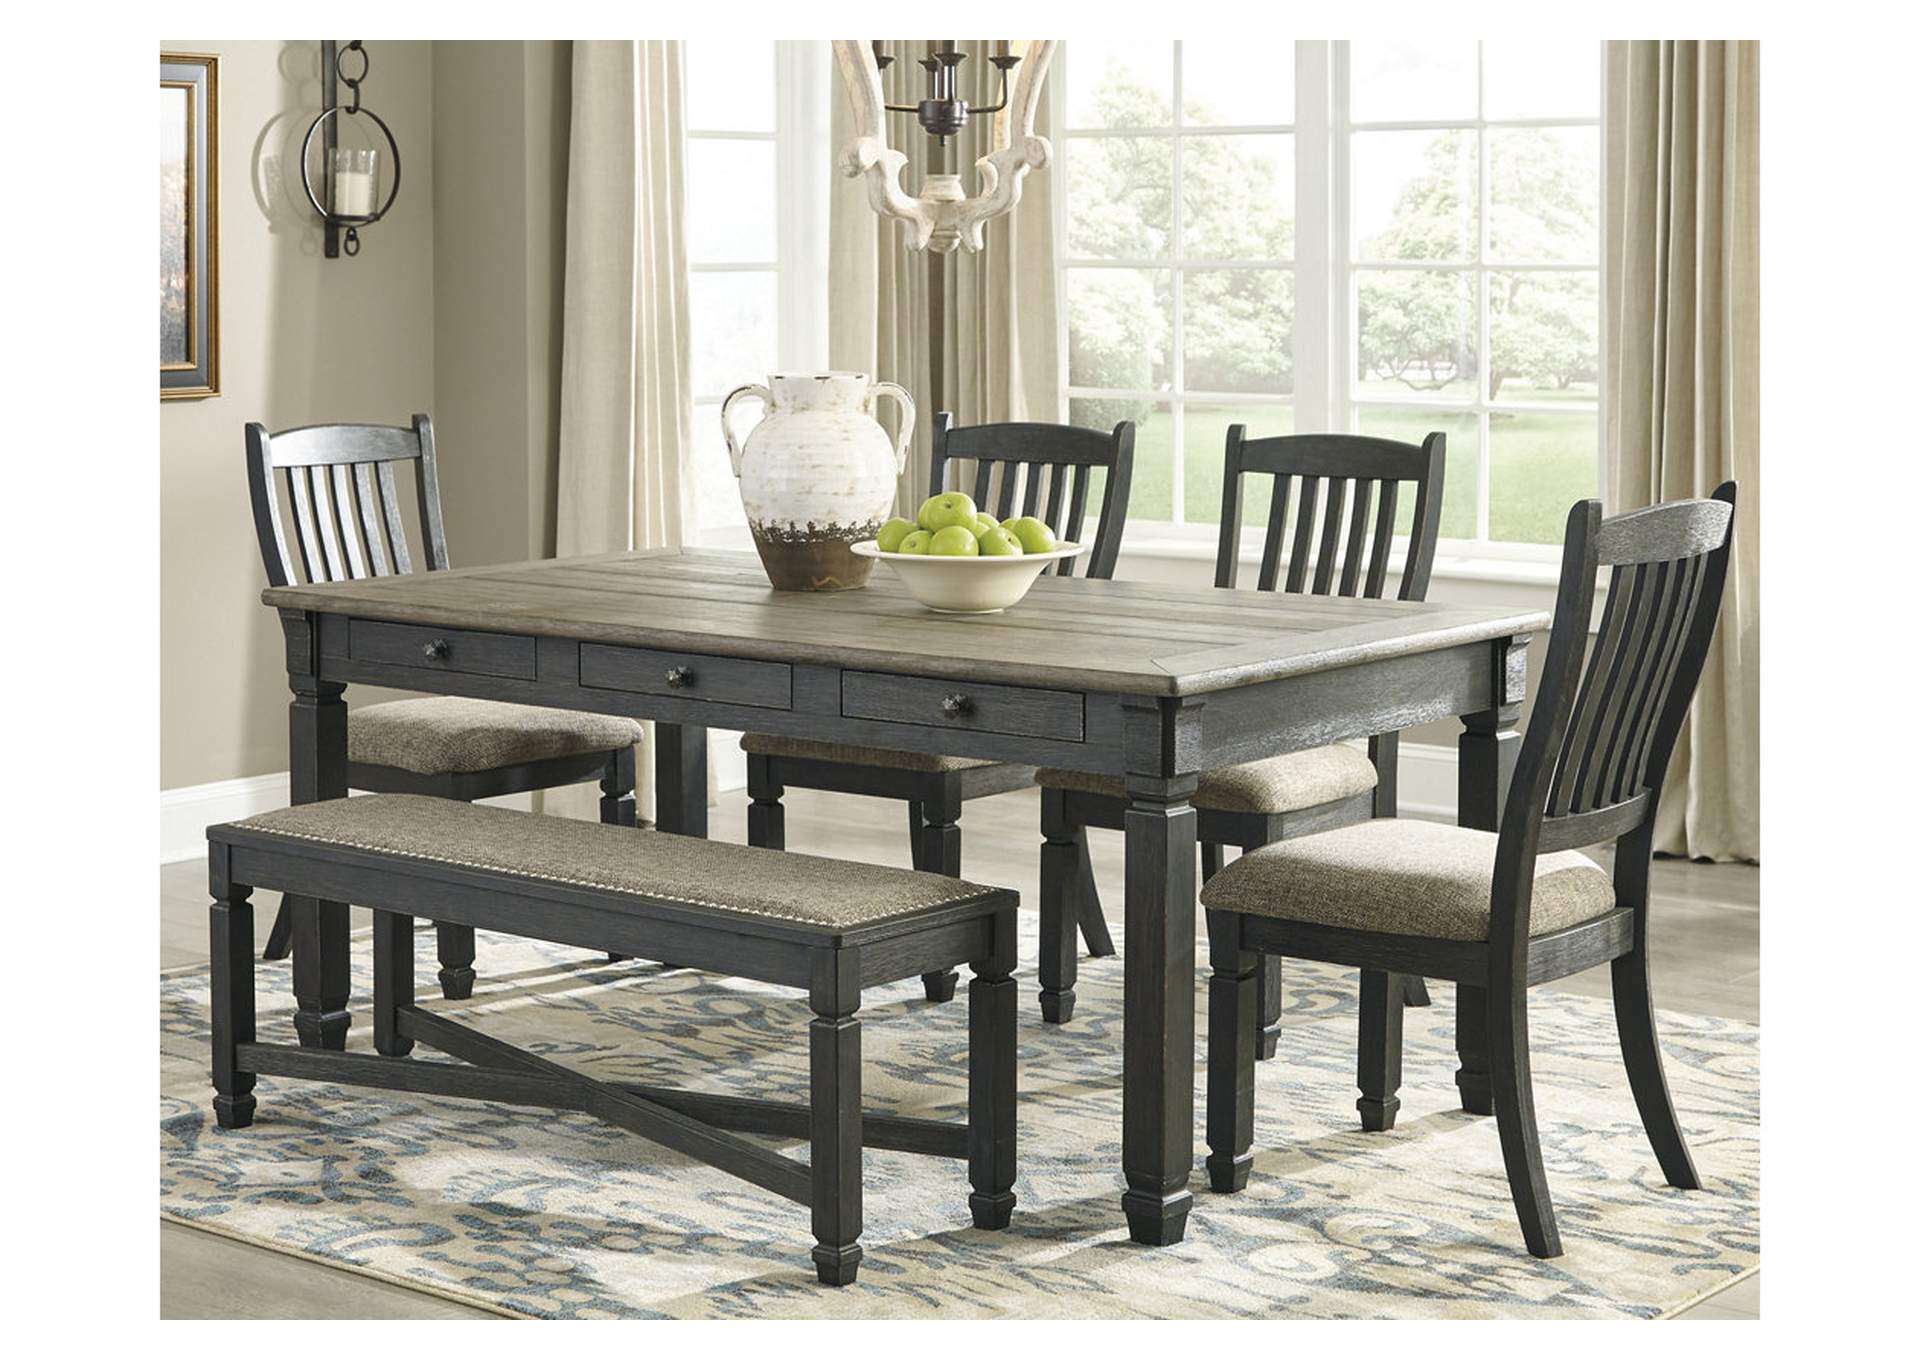 Tyler Creek Dining Table, 4 Chairs and Bench,Signature Design By Ashley